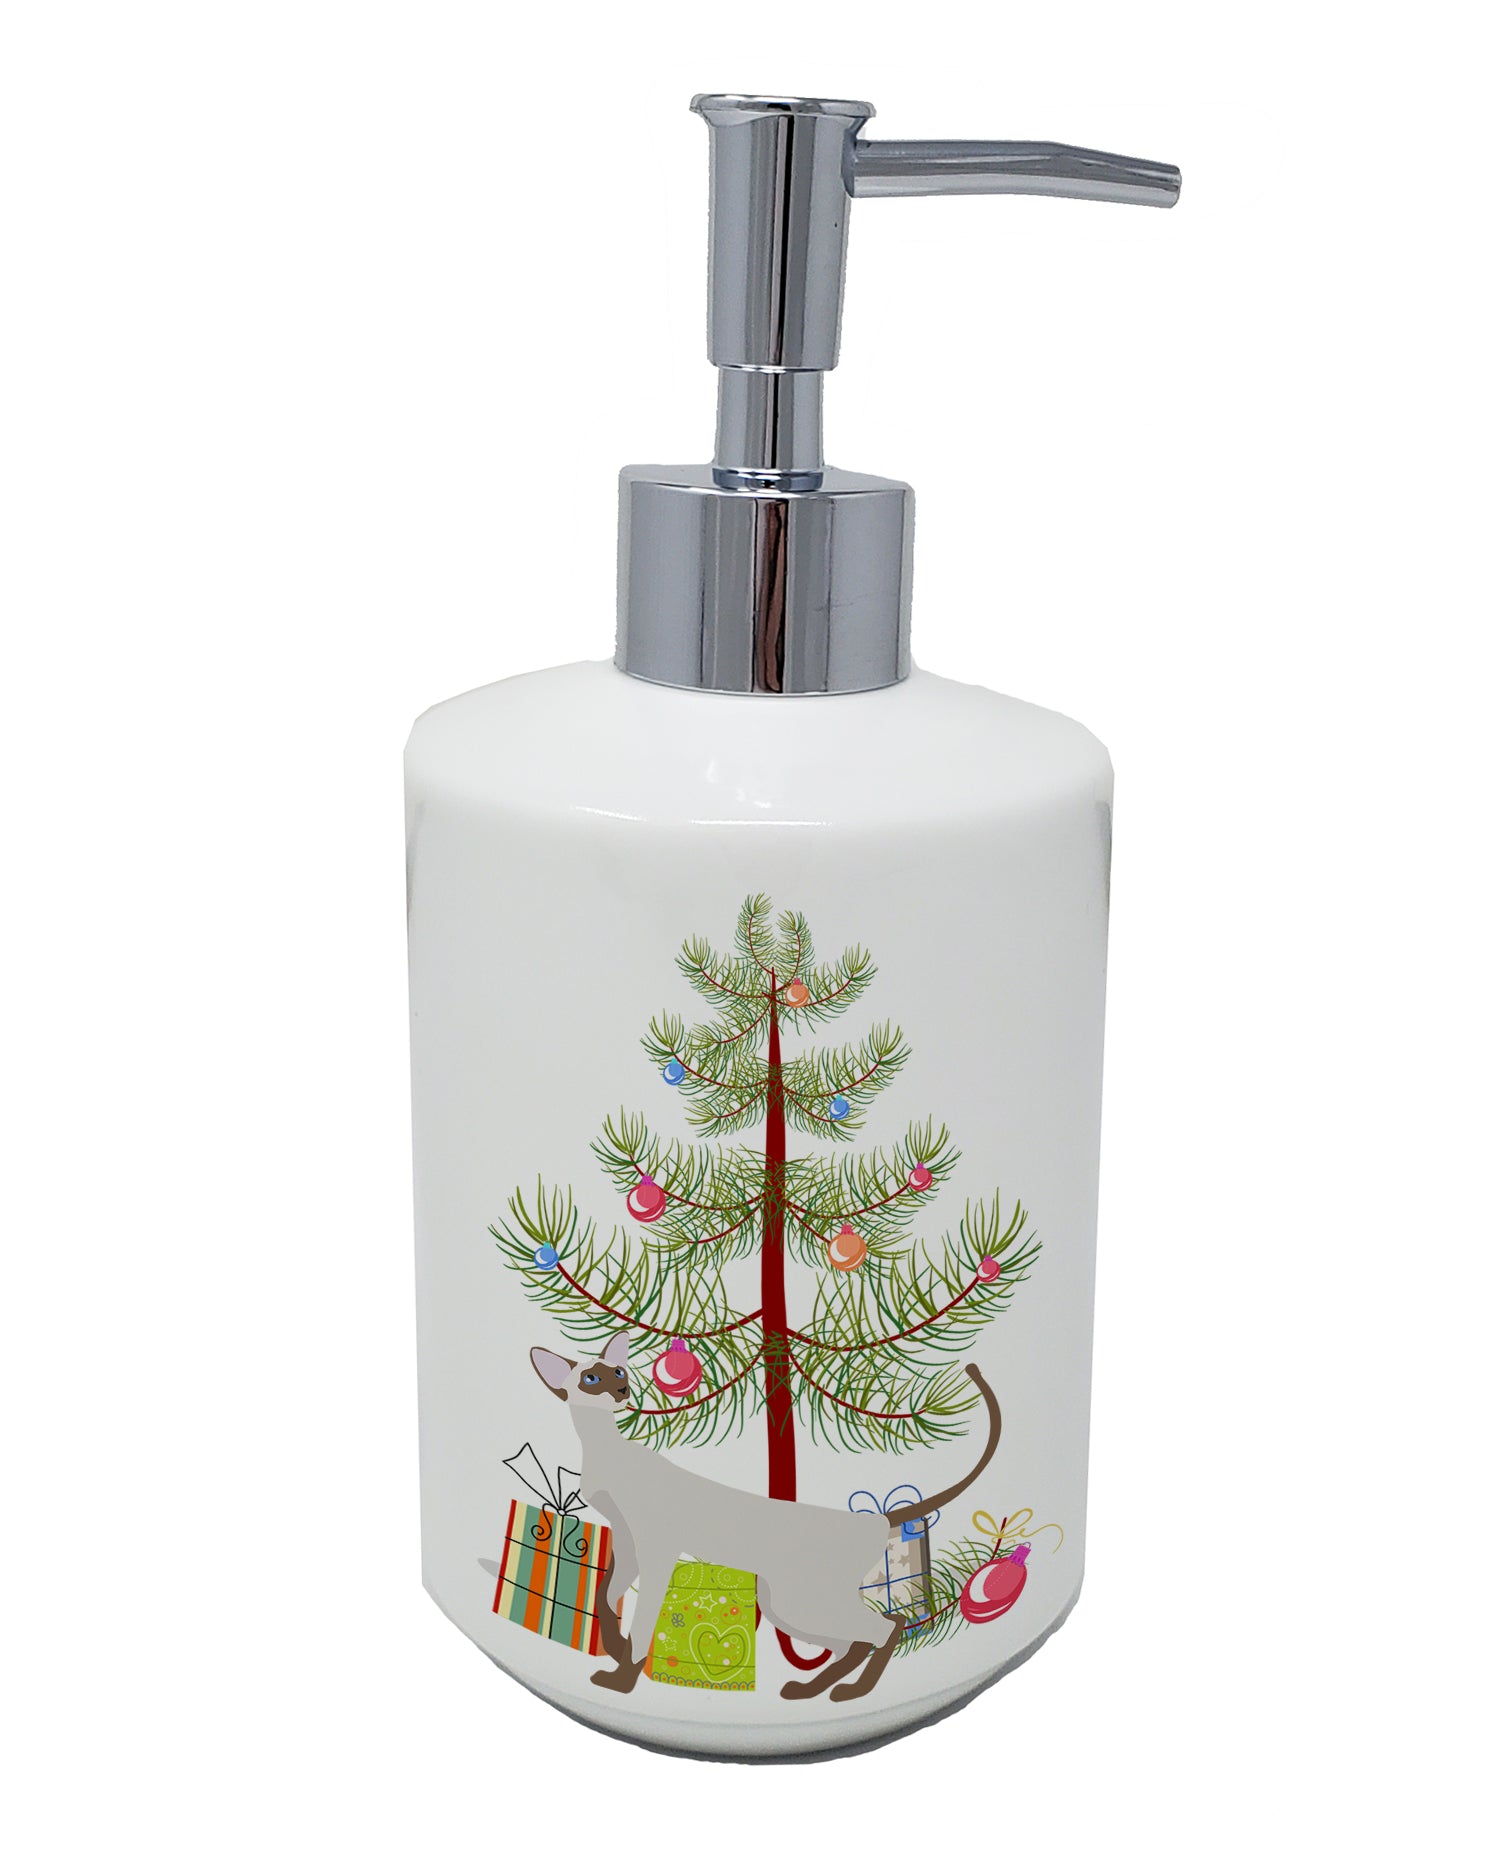 Buy this Colorpoint Shorthair Cat Merry Christmas Ceramic Soap Dispenser